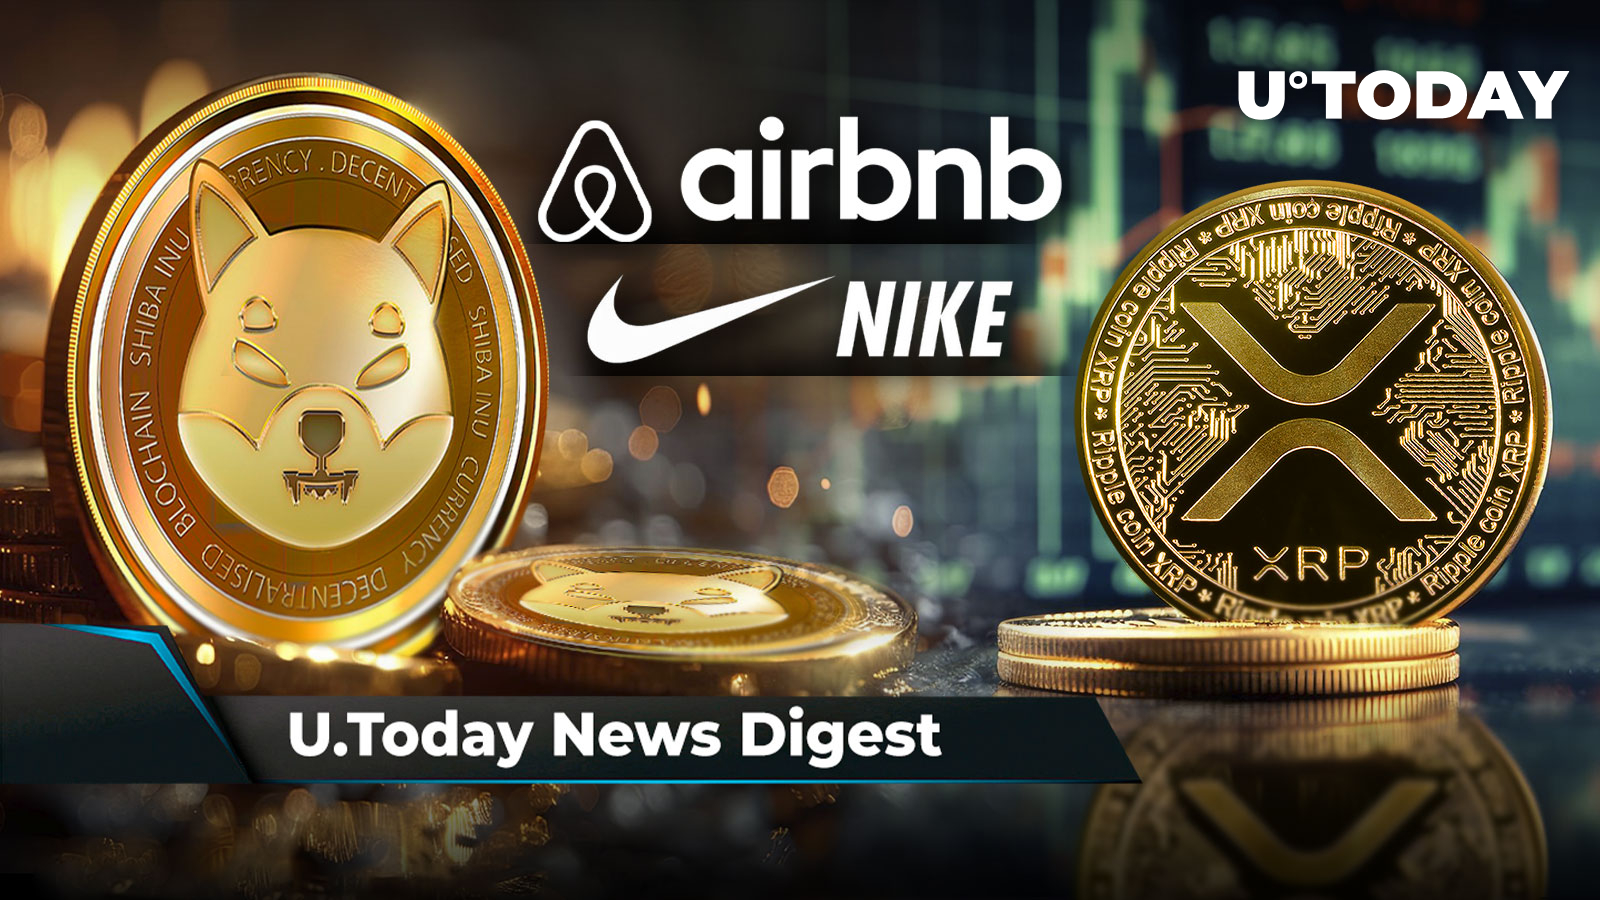 SHIB Payments Expand to Airbnb and Nike, 'Sleeping Giant's' Awakening Could Push XRP Higher, Mark Cuban Says SEC Should Learn From Japan: Crypto News Digest by U.Today